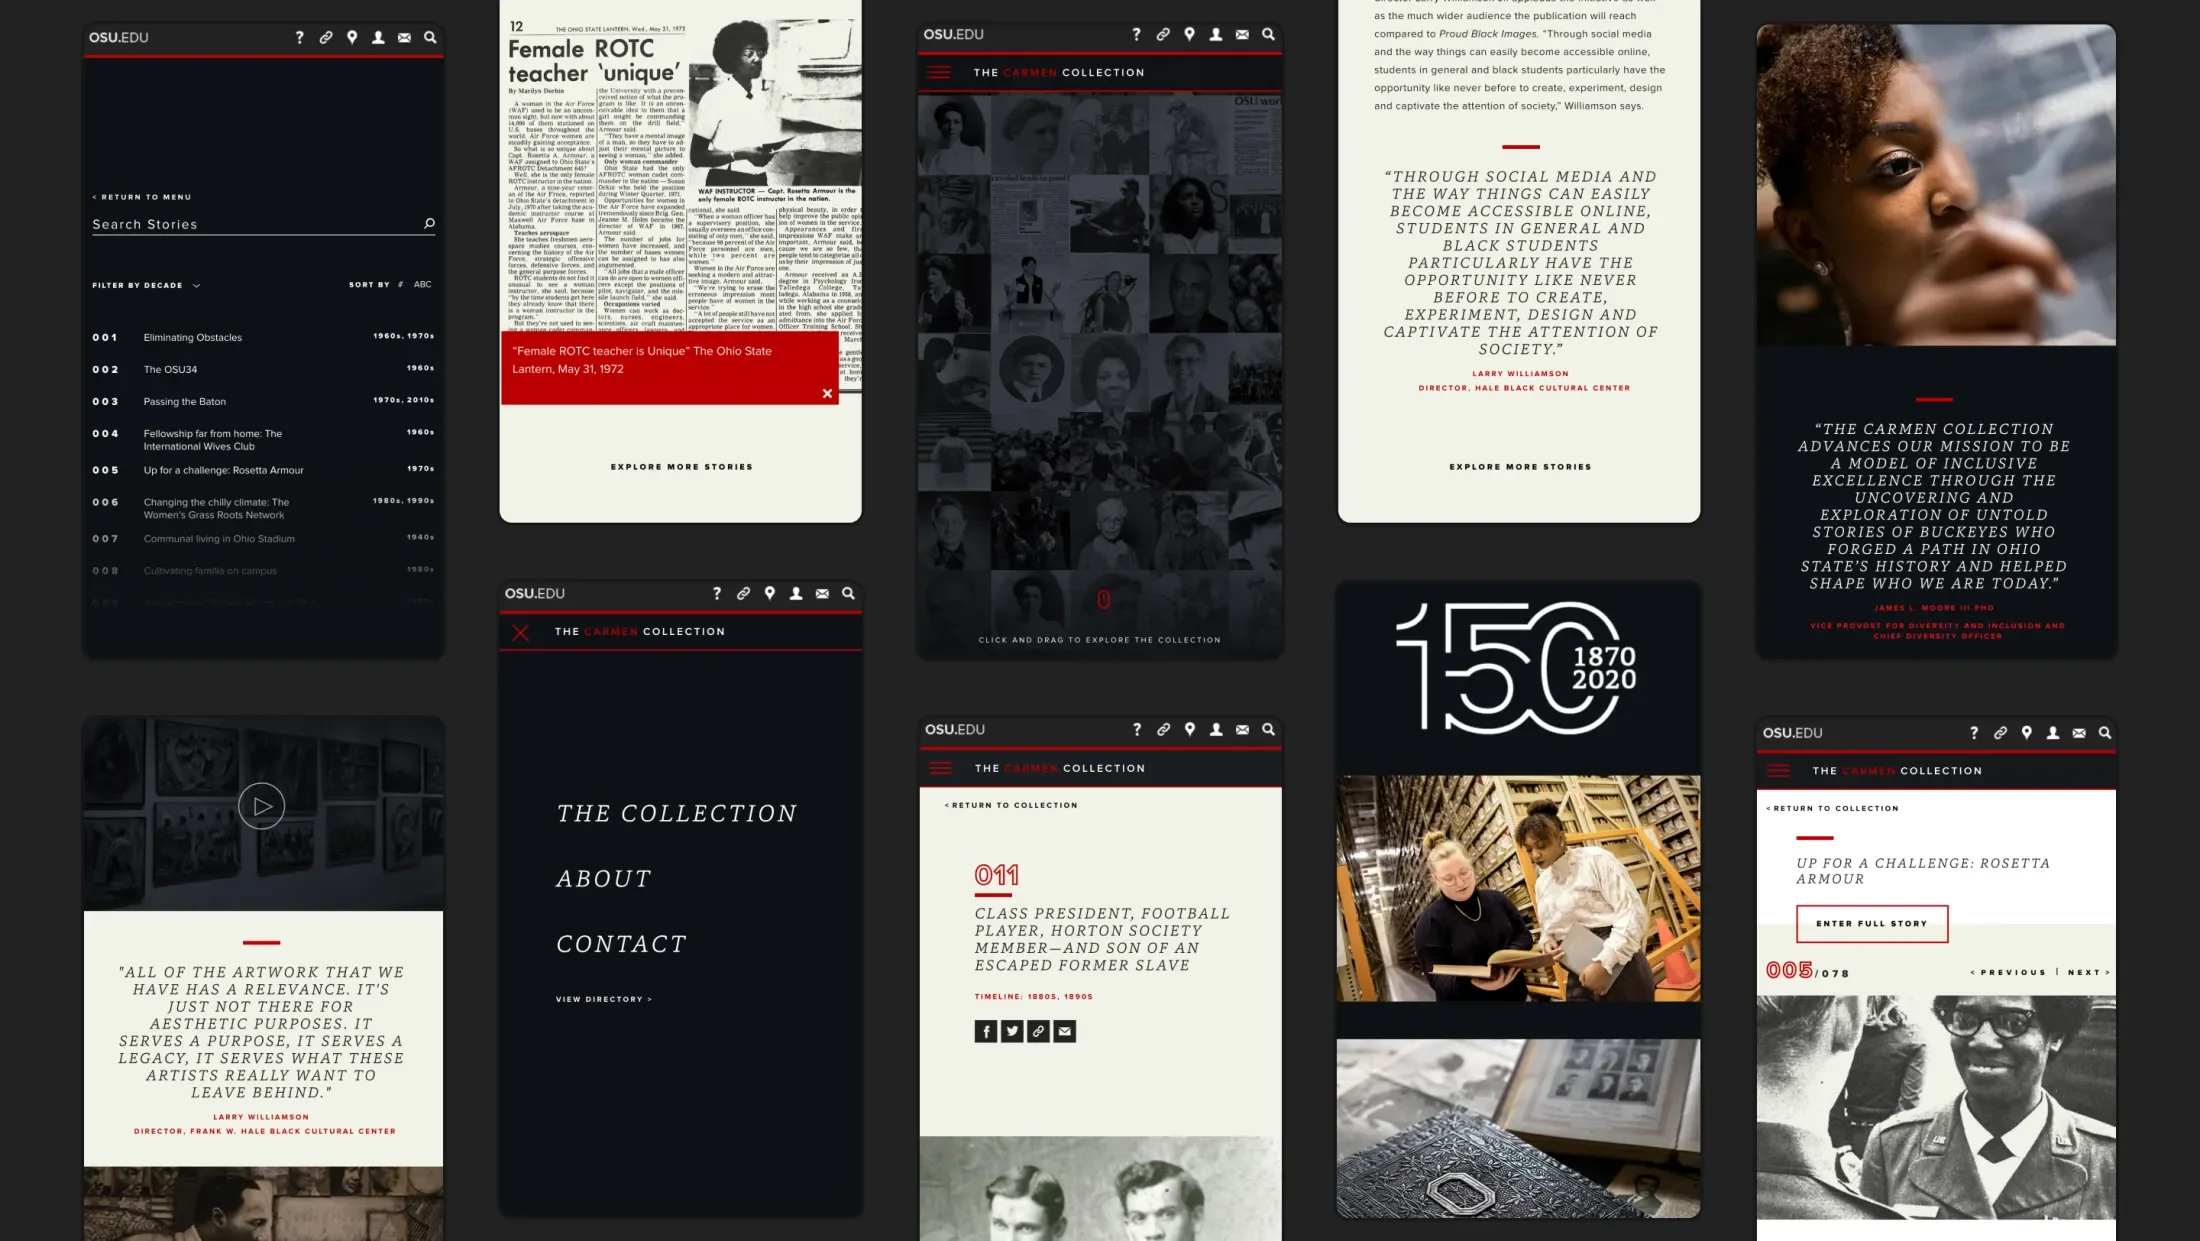 Image showing various phone screens of different layouts of the OSU Carmen COllection Website